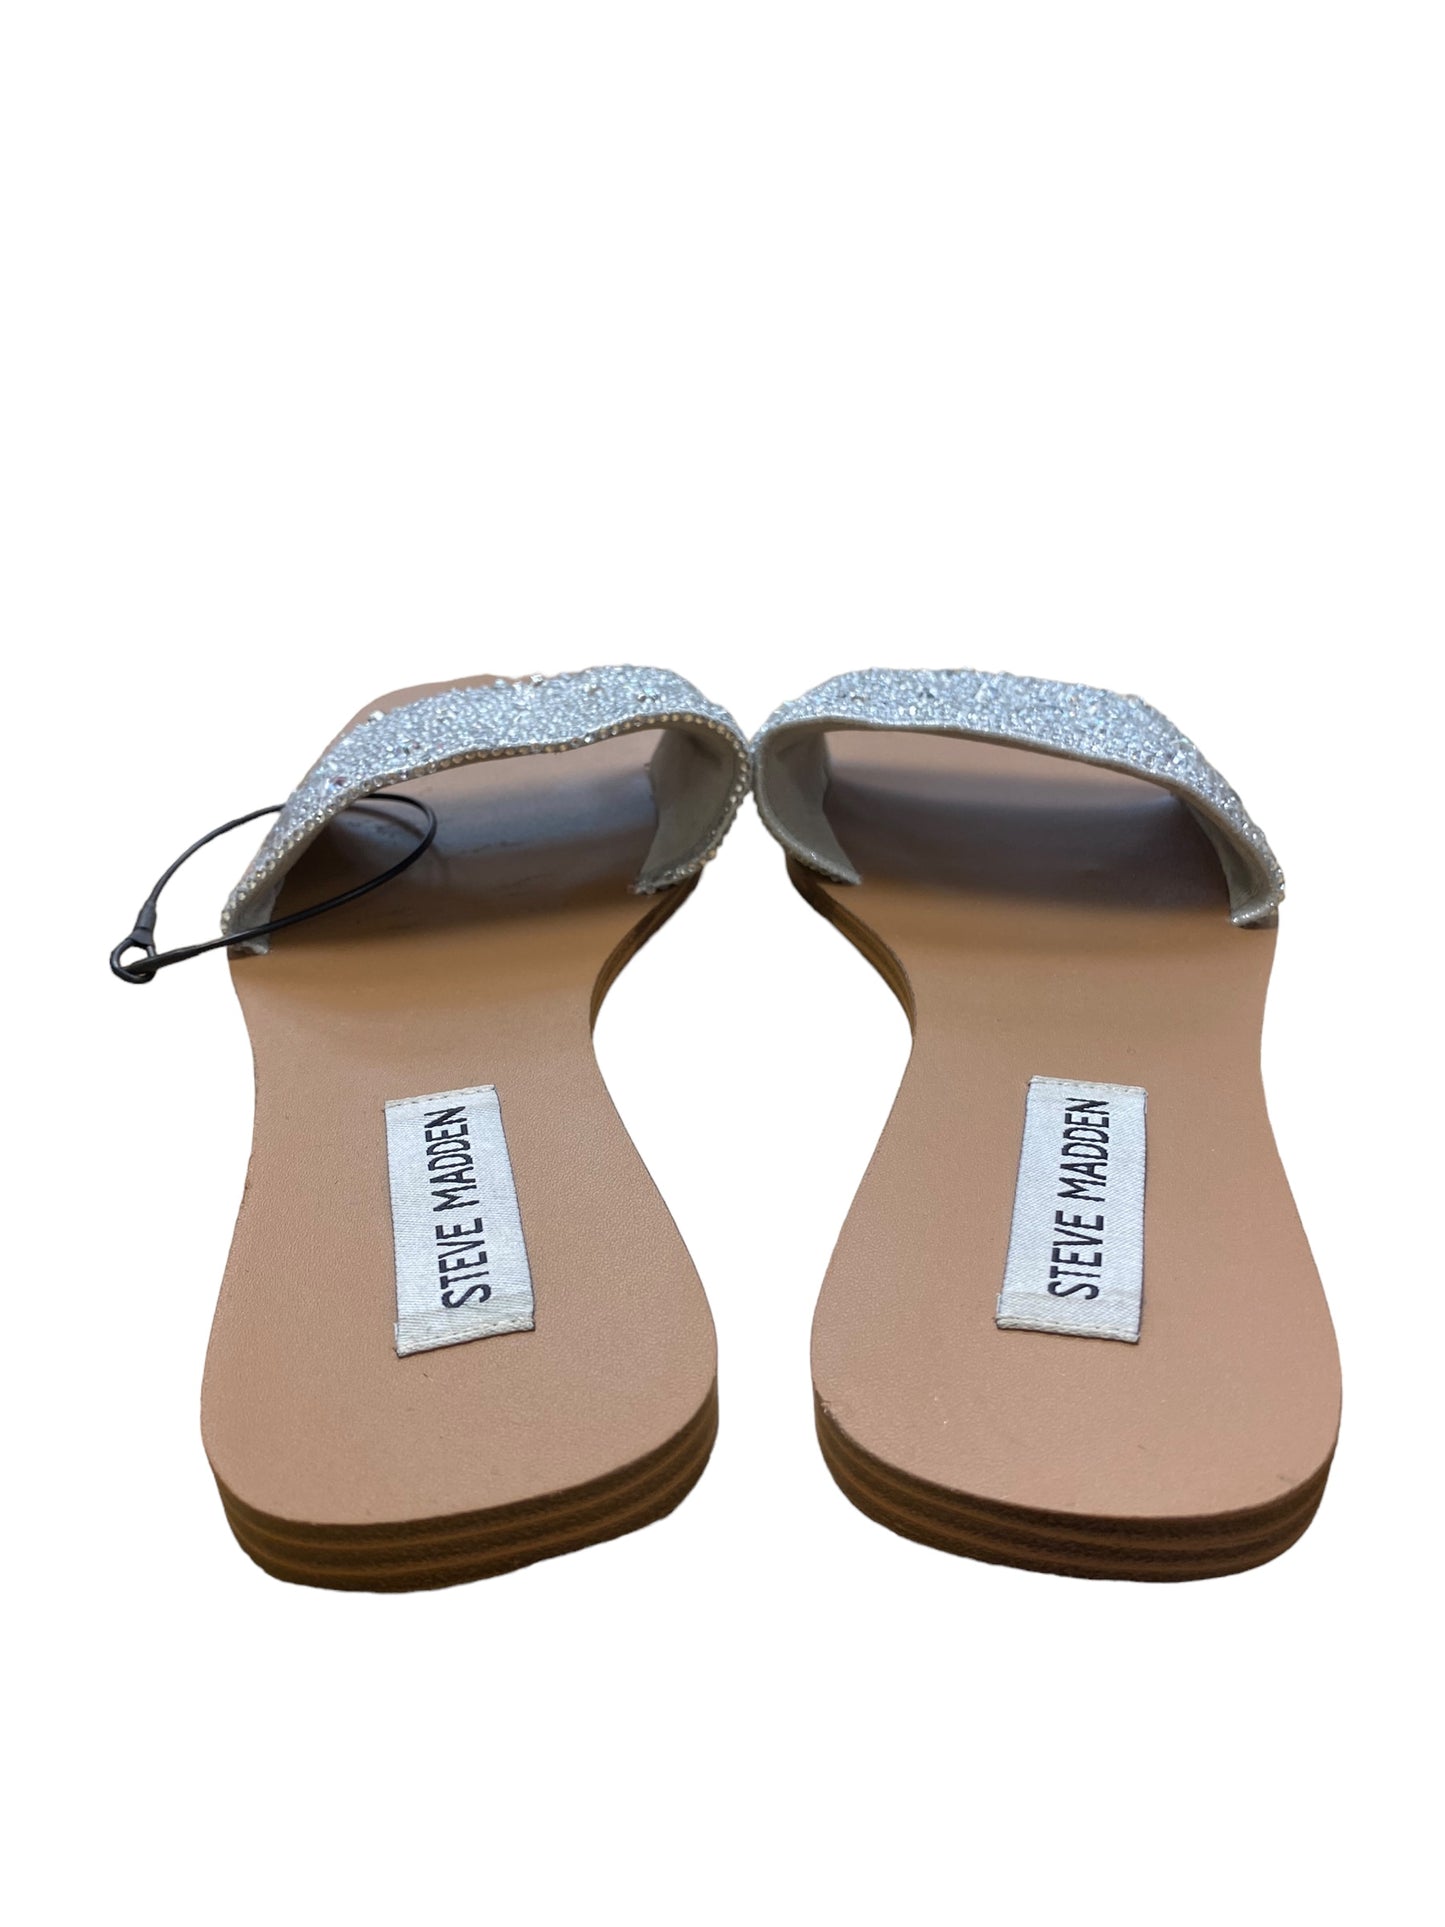 Sandals Flats By Steve Madden  Size: 9